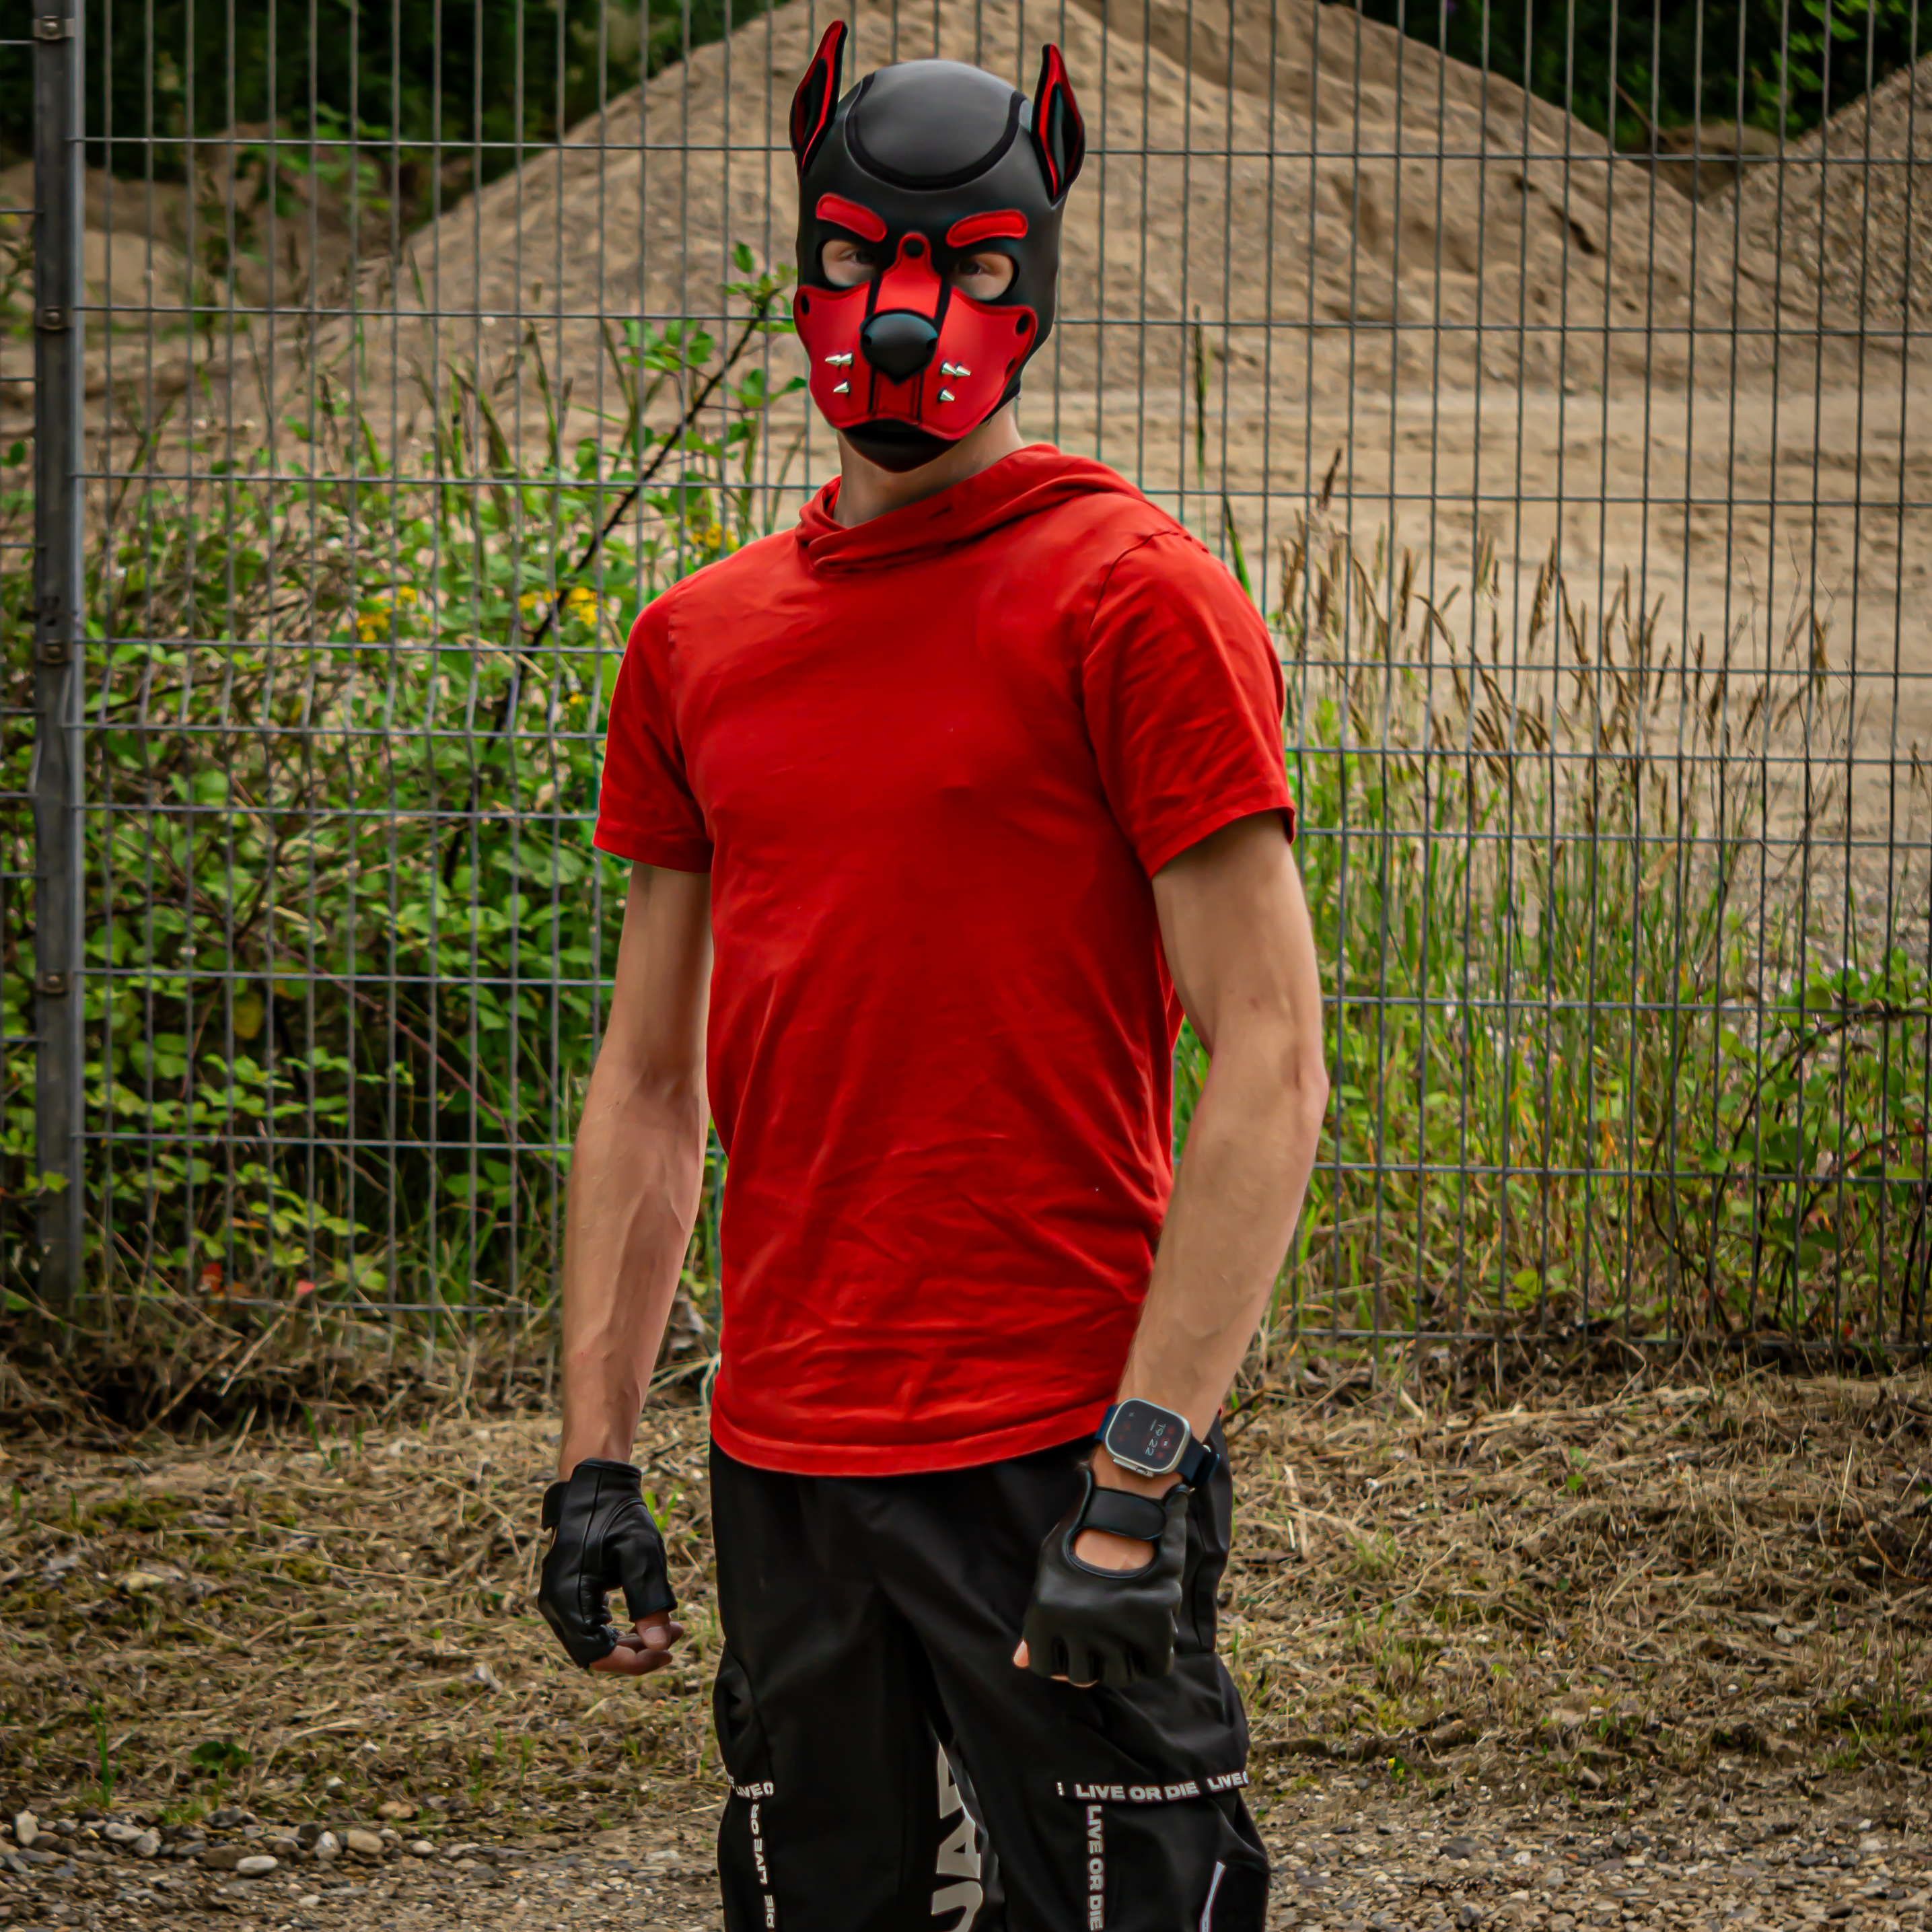 a man wearing a red shirt and black gloves with a dog mask